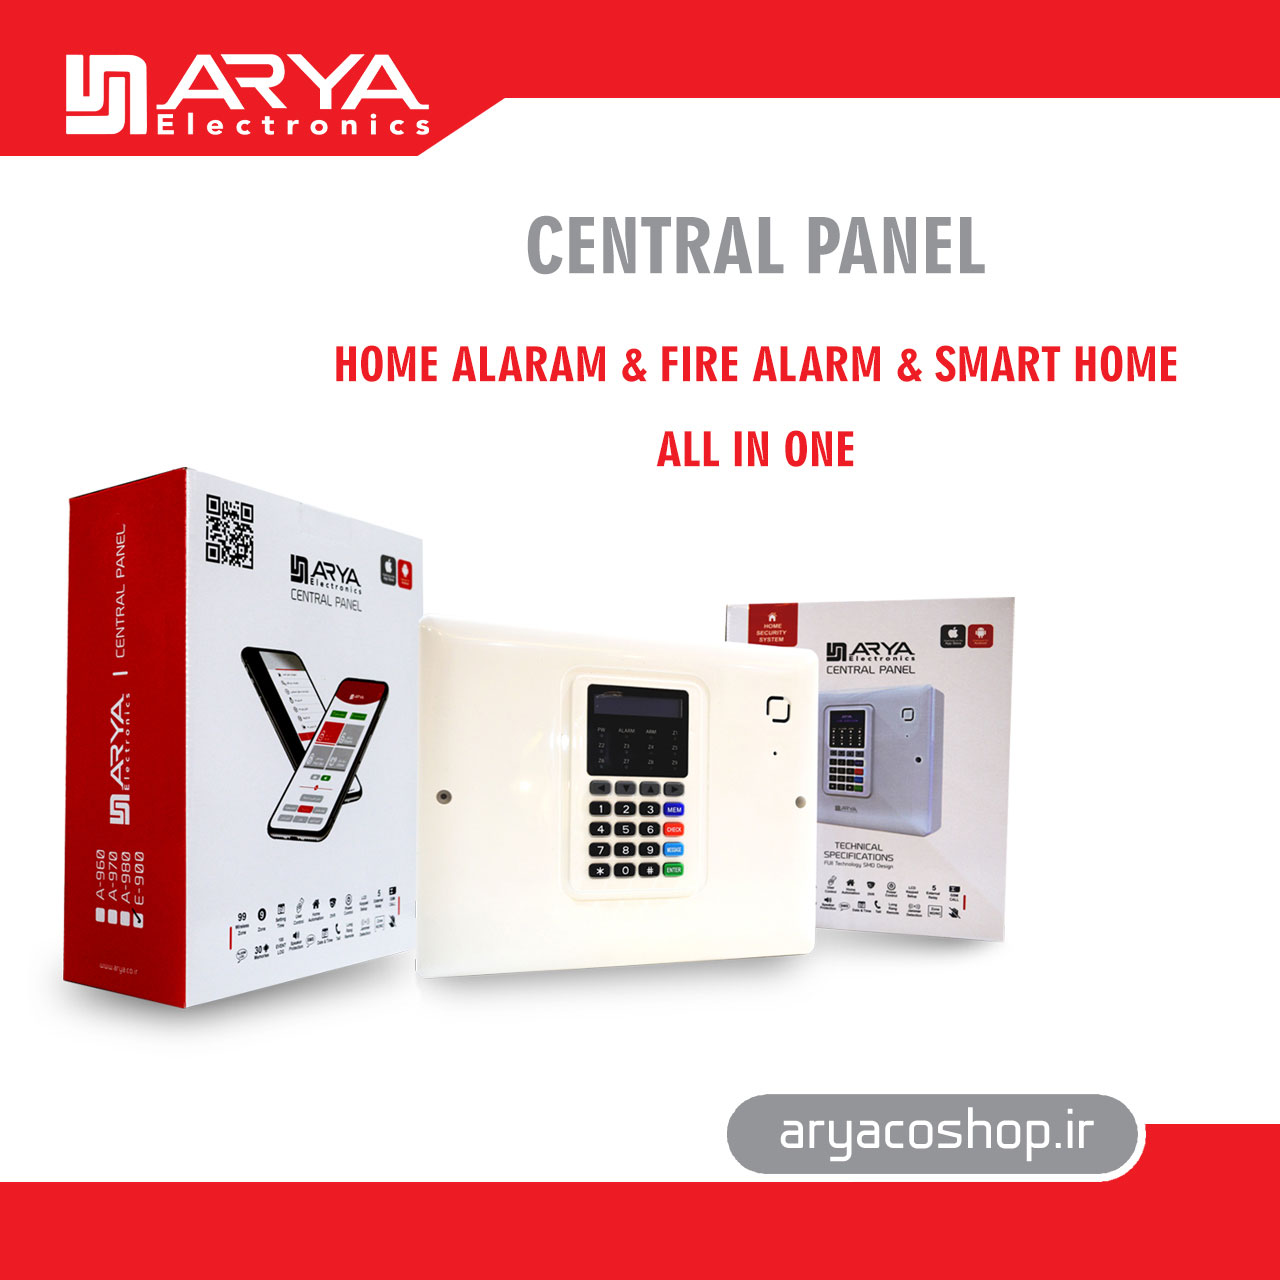 "CENTRAL PANEL HOME ALARM & FIRE ALARM & SMART HOME ALL IN ONE SYSTEM"